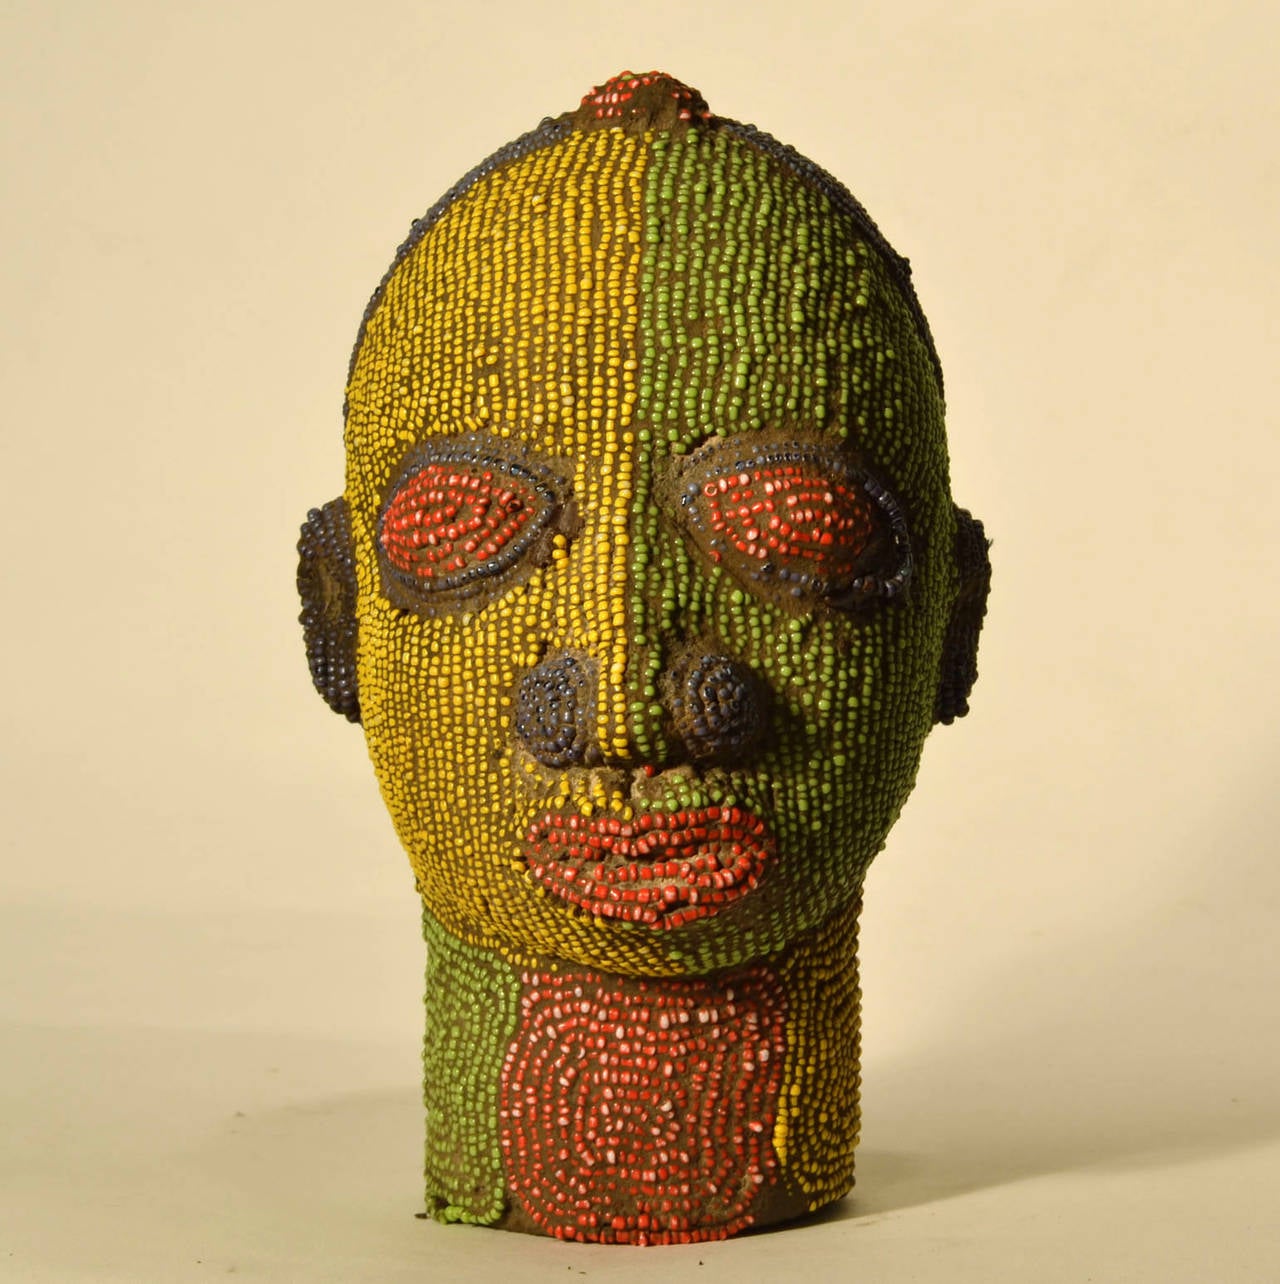 Brightly coloured beaded terracotta head commissioned in the 1960's to decorate wealthy Nigerian homes. The terracotta sculpture is inlaid with strings of beads over its ceramic form.
They sometimes came in pairs as man and women or two females.